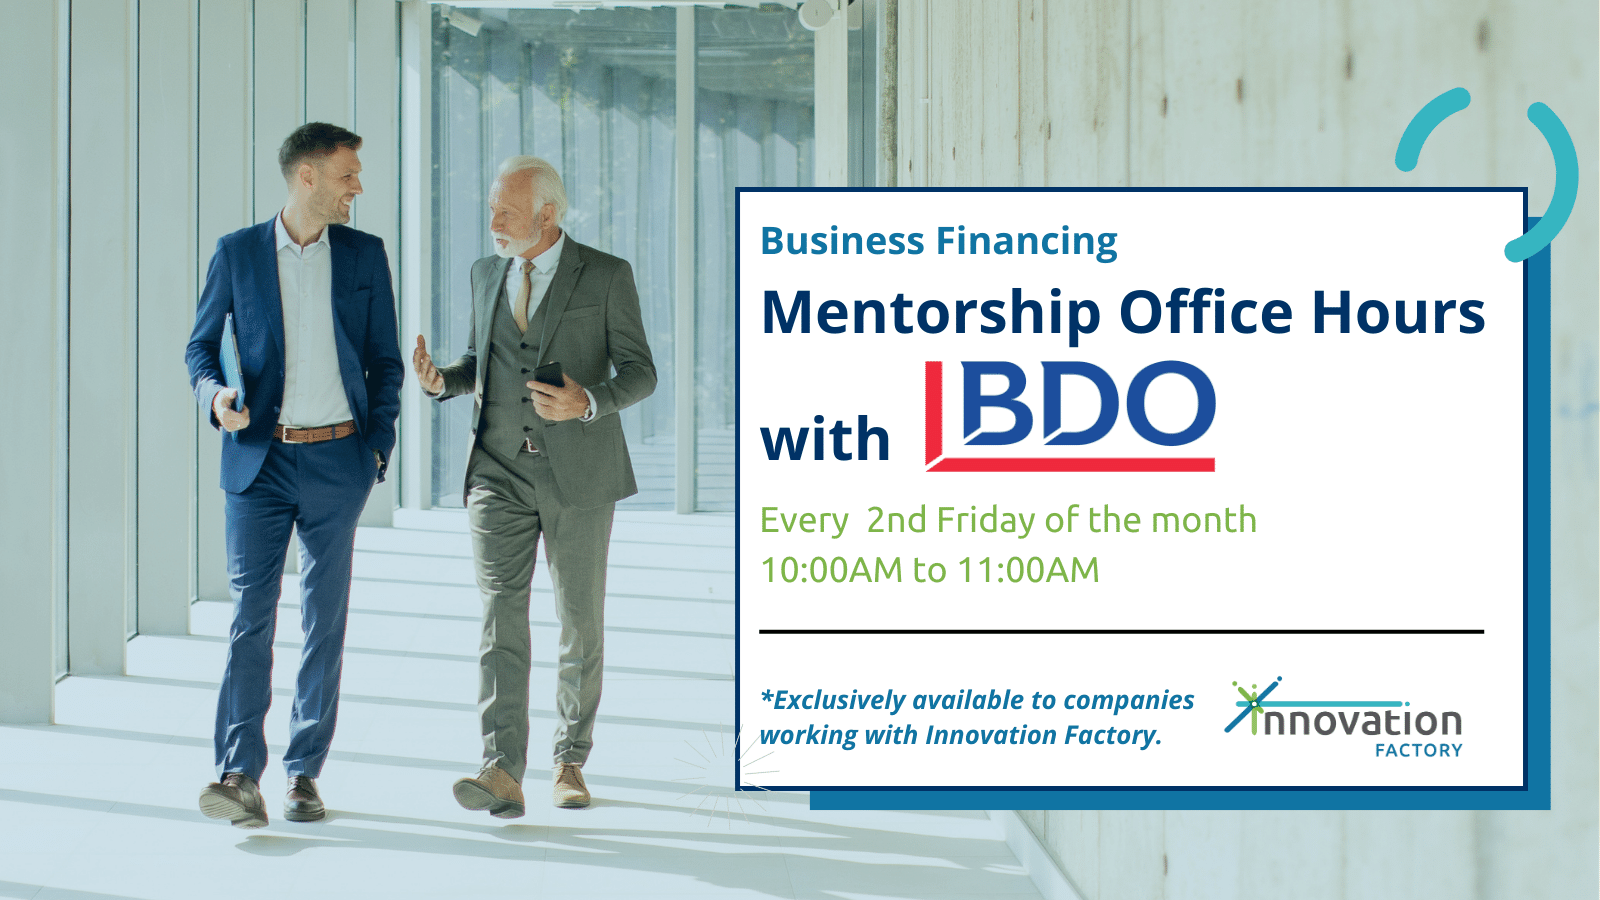 Business Financing mentorship office hours for startups and entrepreneurs with BDO